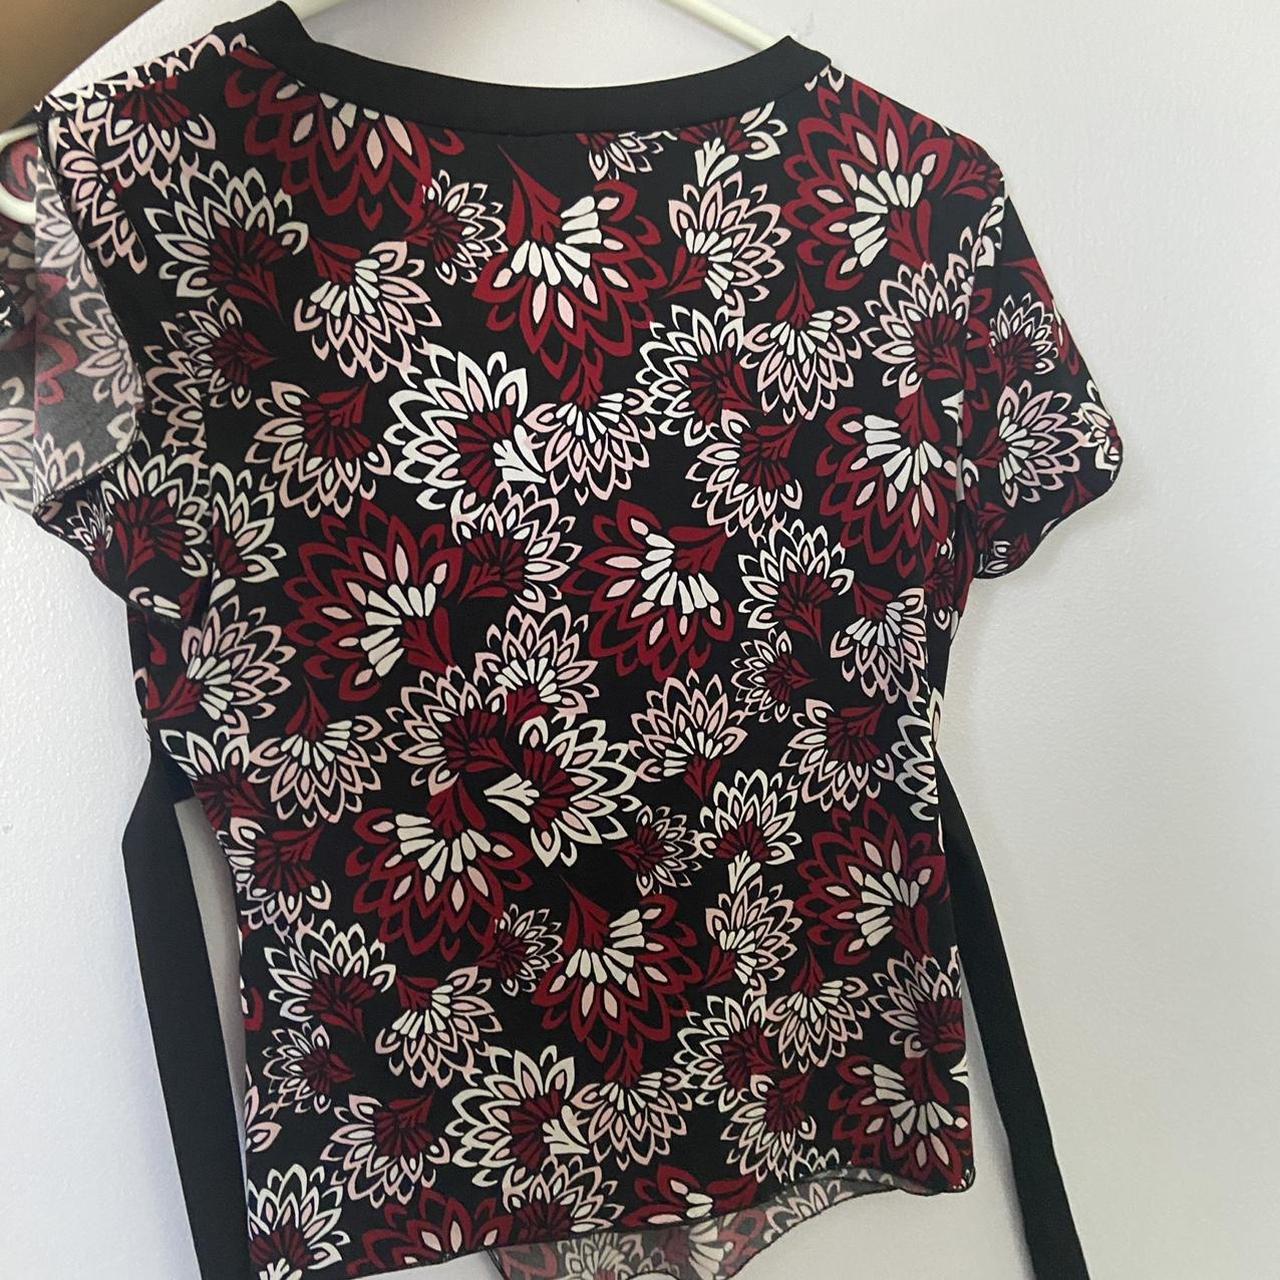 Product Image 3 - Cute flower print top. Has